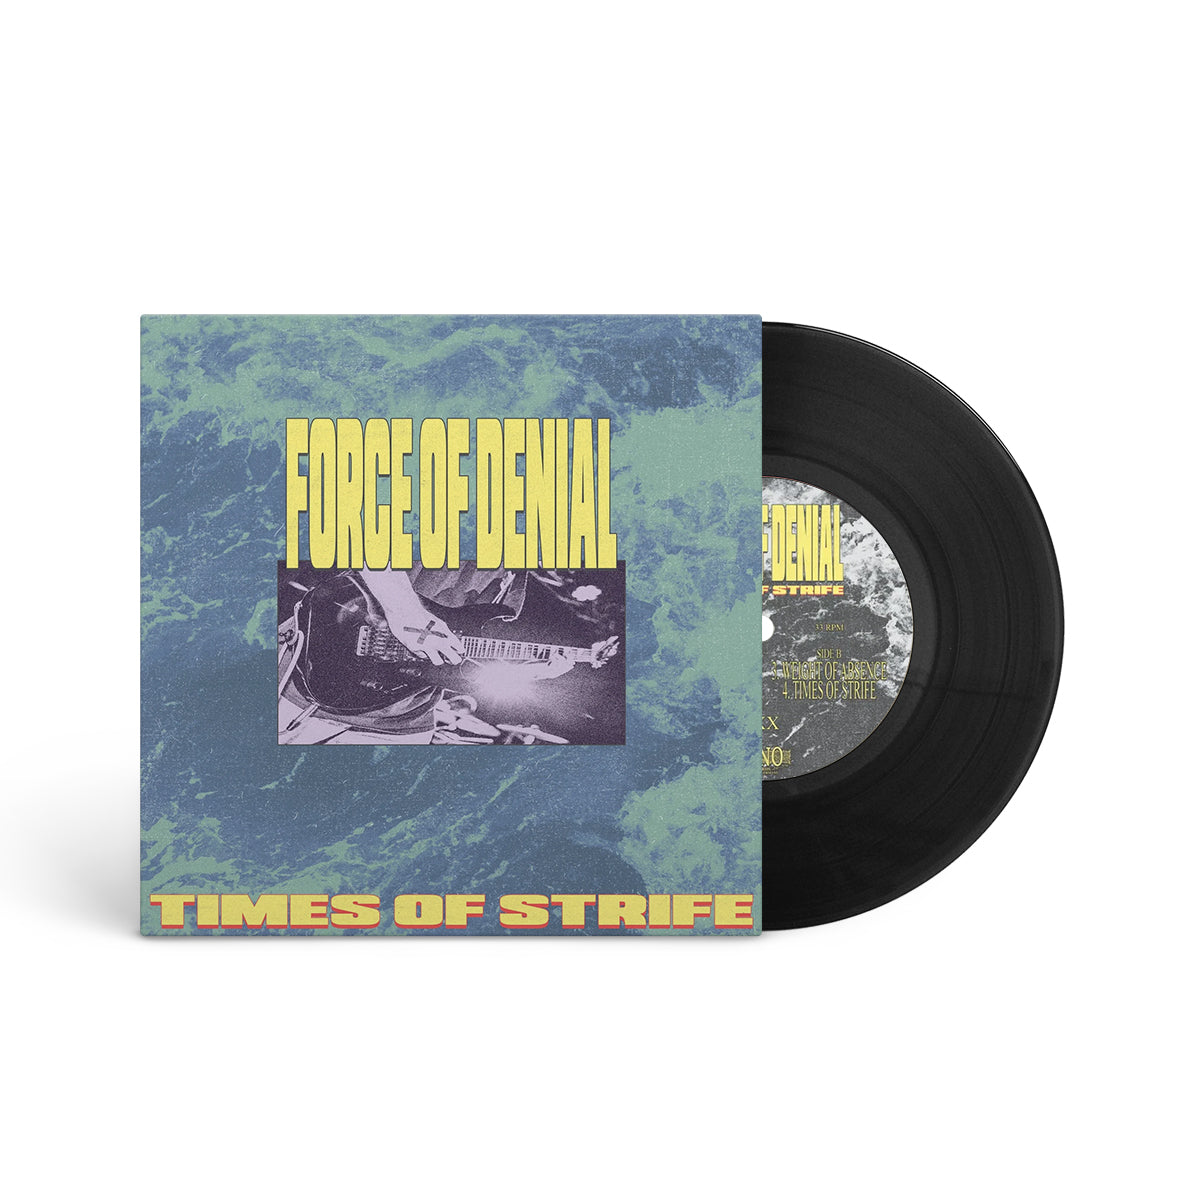 FORCE OF DENIAL "Times Of Strife" 7"